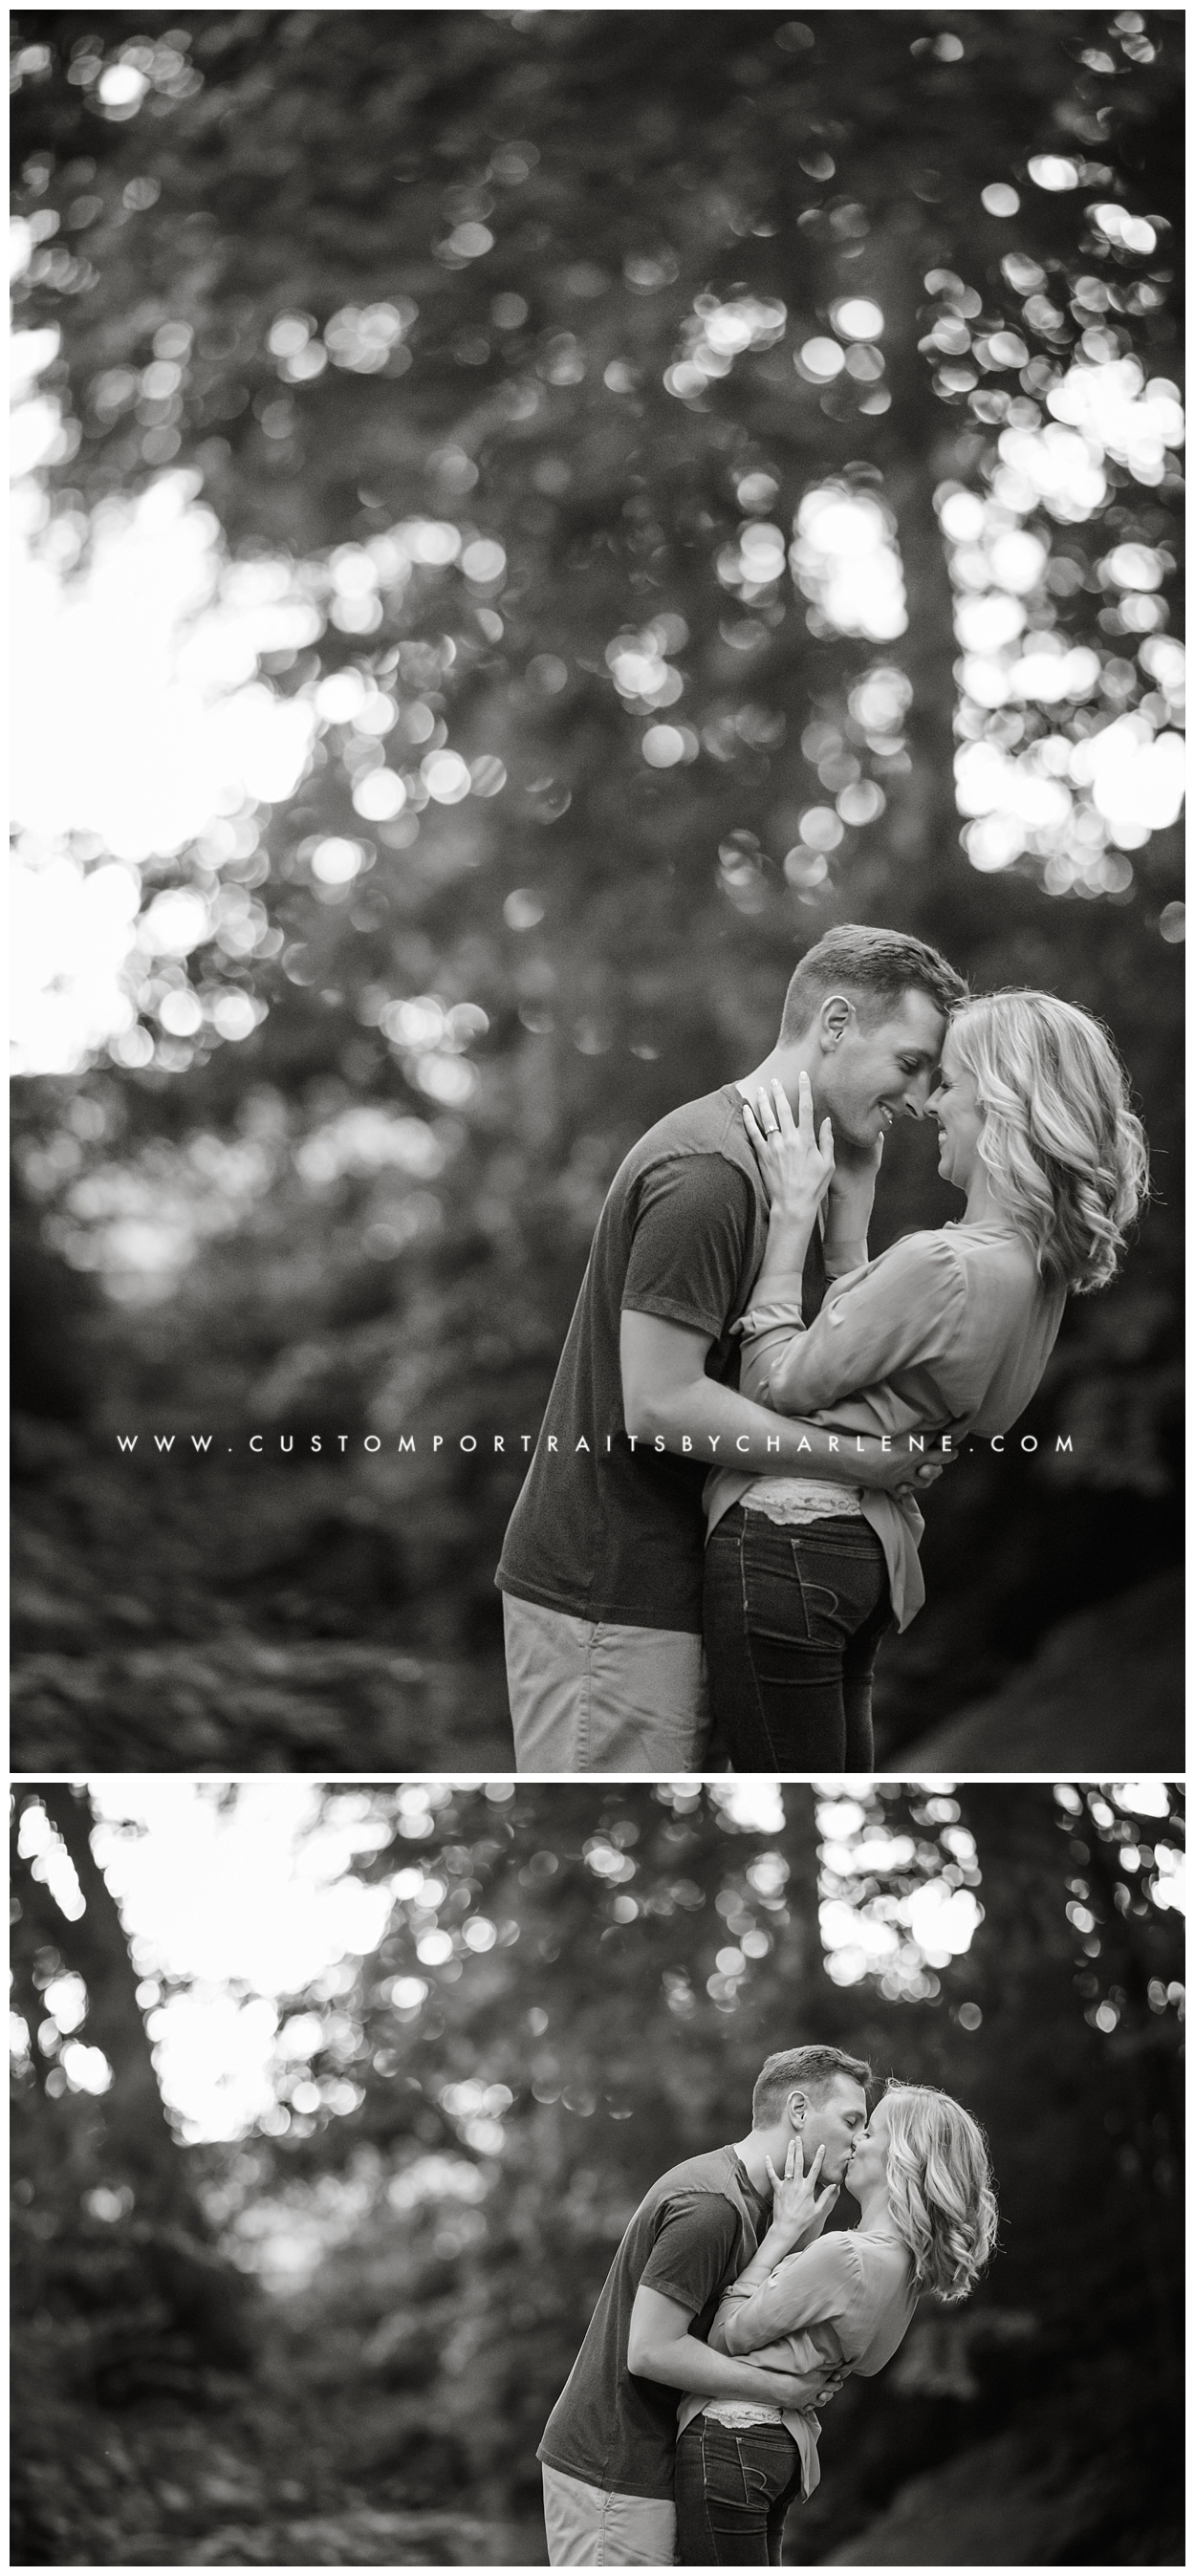 Sewickley Engagement Session - Engagement Picture Ideas - Pittsburgh Wedding Photography - Urban Rural Park Engaged16